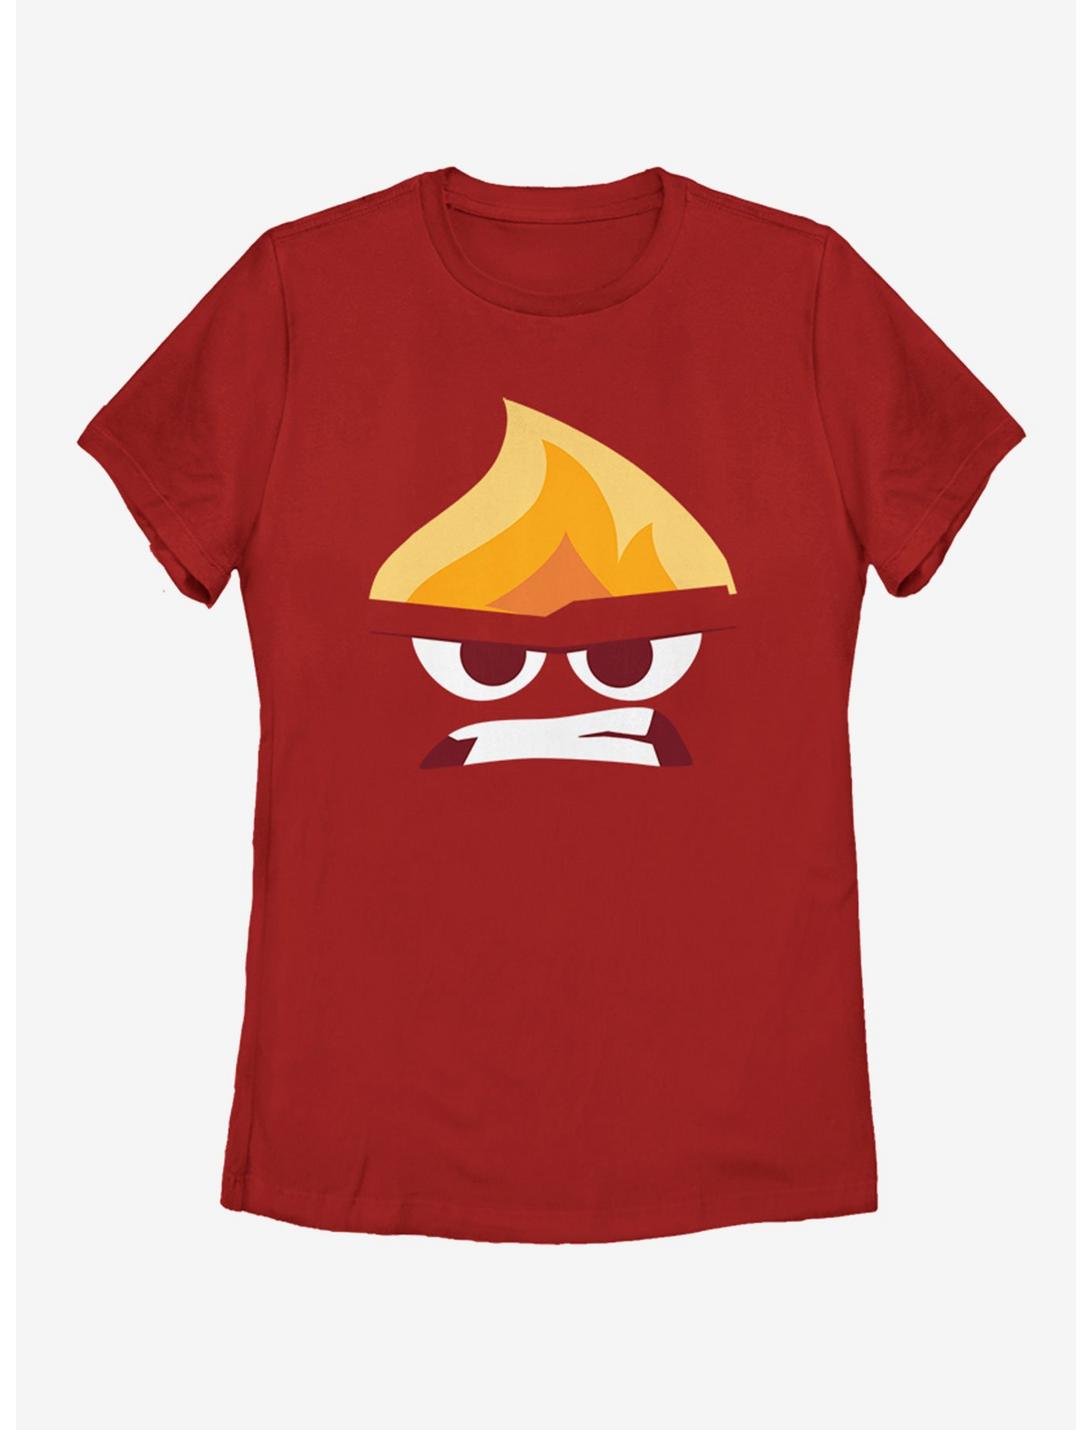 Disney Pixar Inside Out Angry Face Womens T-Shirt, RED, hi-res